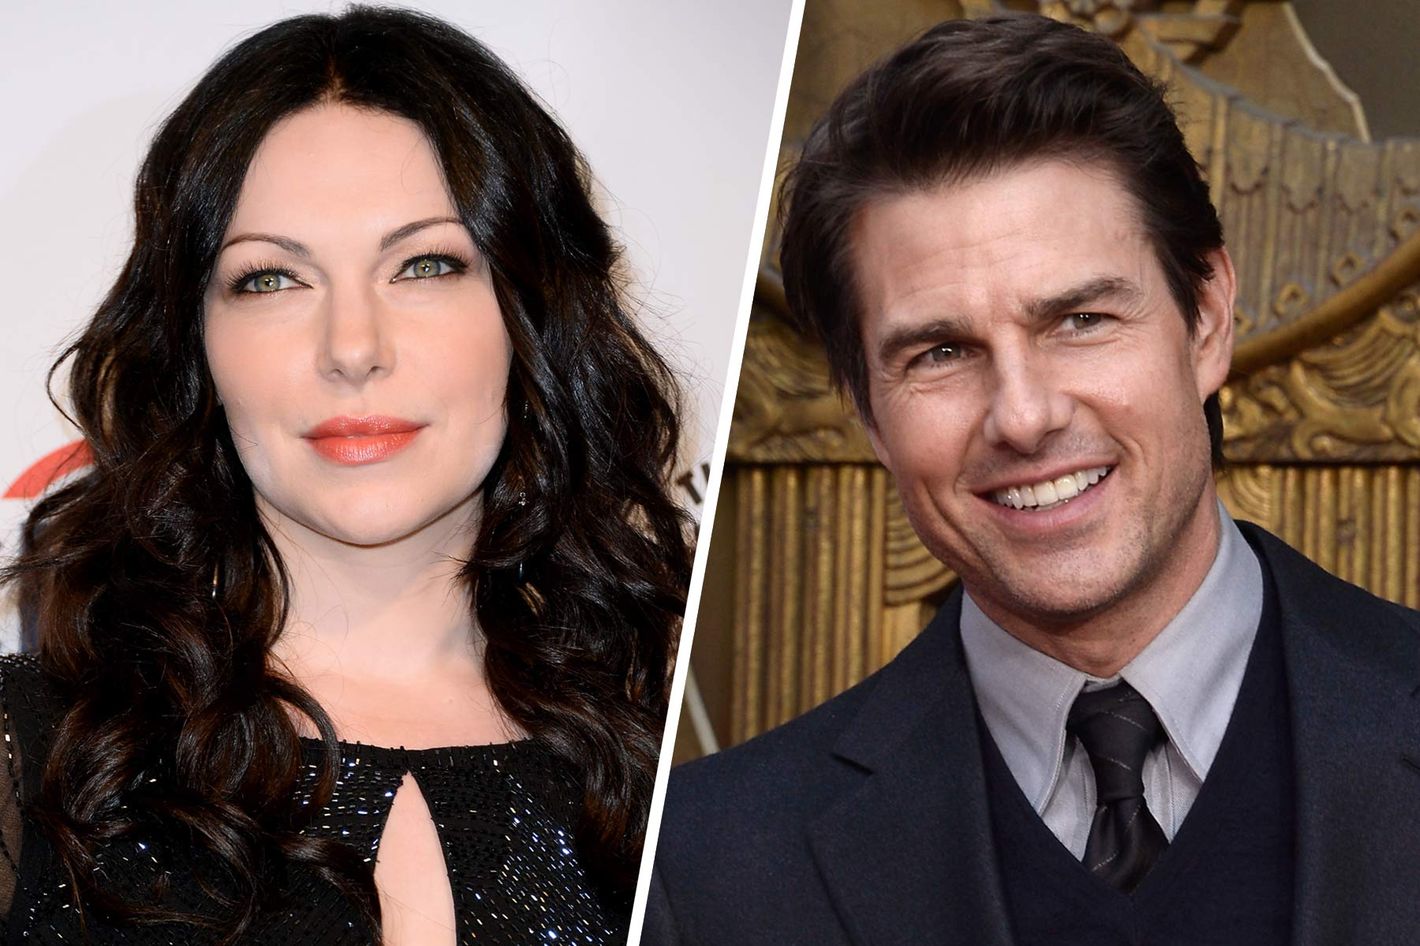 Are Laura Prepon and Tom Cruise Secretly Dating?